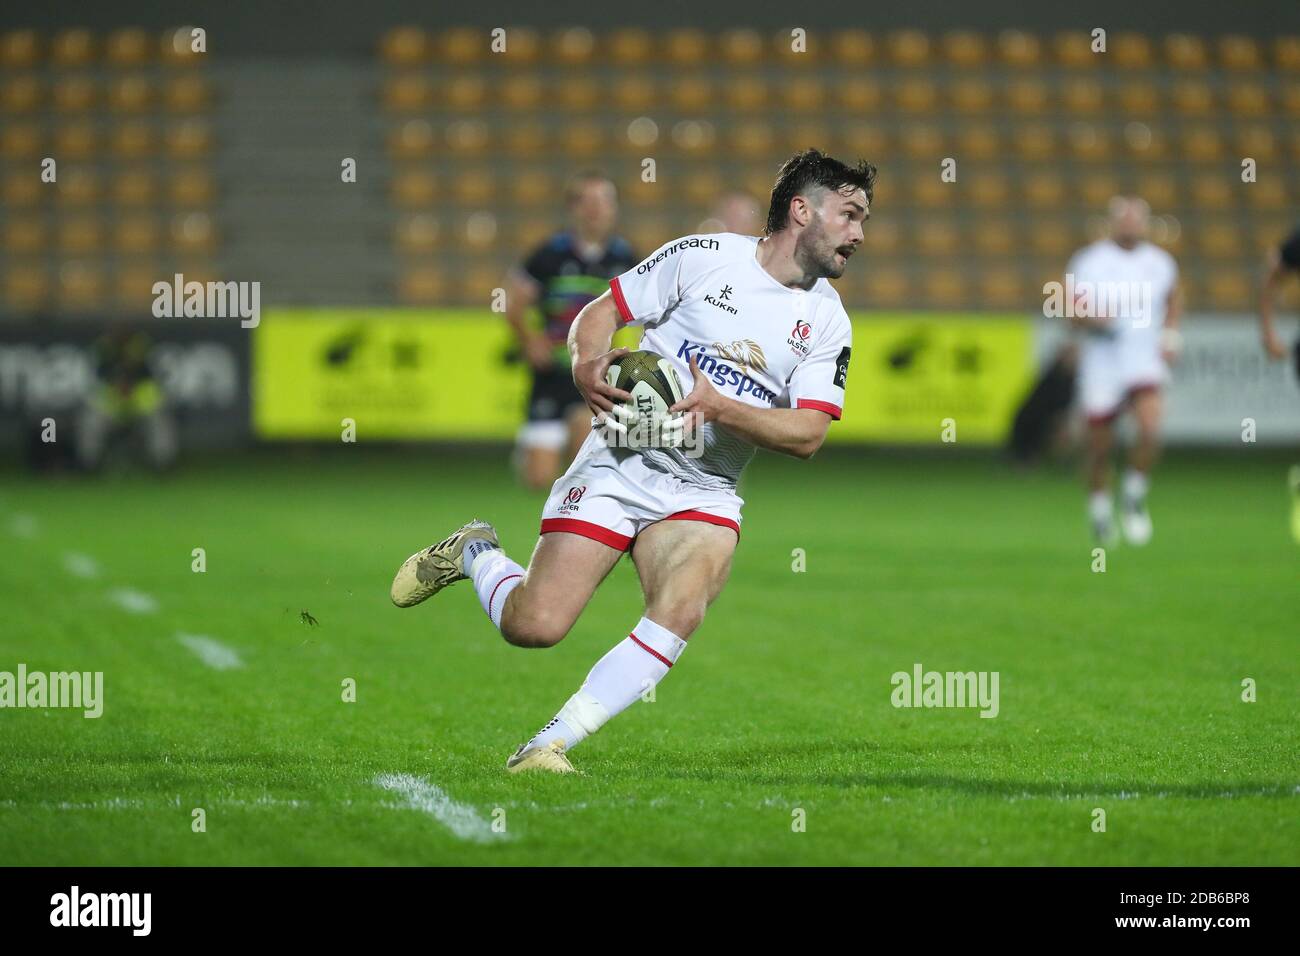 Parma, Italy. 16th Nov, 2020. parma, Italy, Sergio Lanfranchi stadium, 16 Nov 2020, Bill Johnston (Ulster) during Zebre Rugby vs Ulster Rugby - Rugby Guinness Pro 14 match - Credit: LM/Massimiliano Carnabuci Credit: Massimiliano Carnabuci/LPS/ZUMA Wire/Alamy Live News Stock Photo